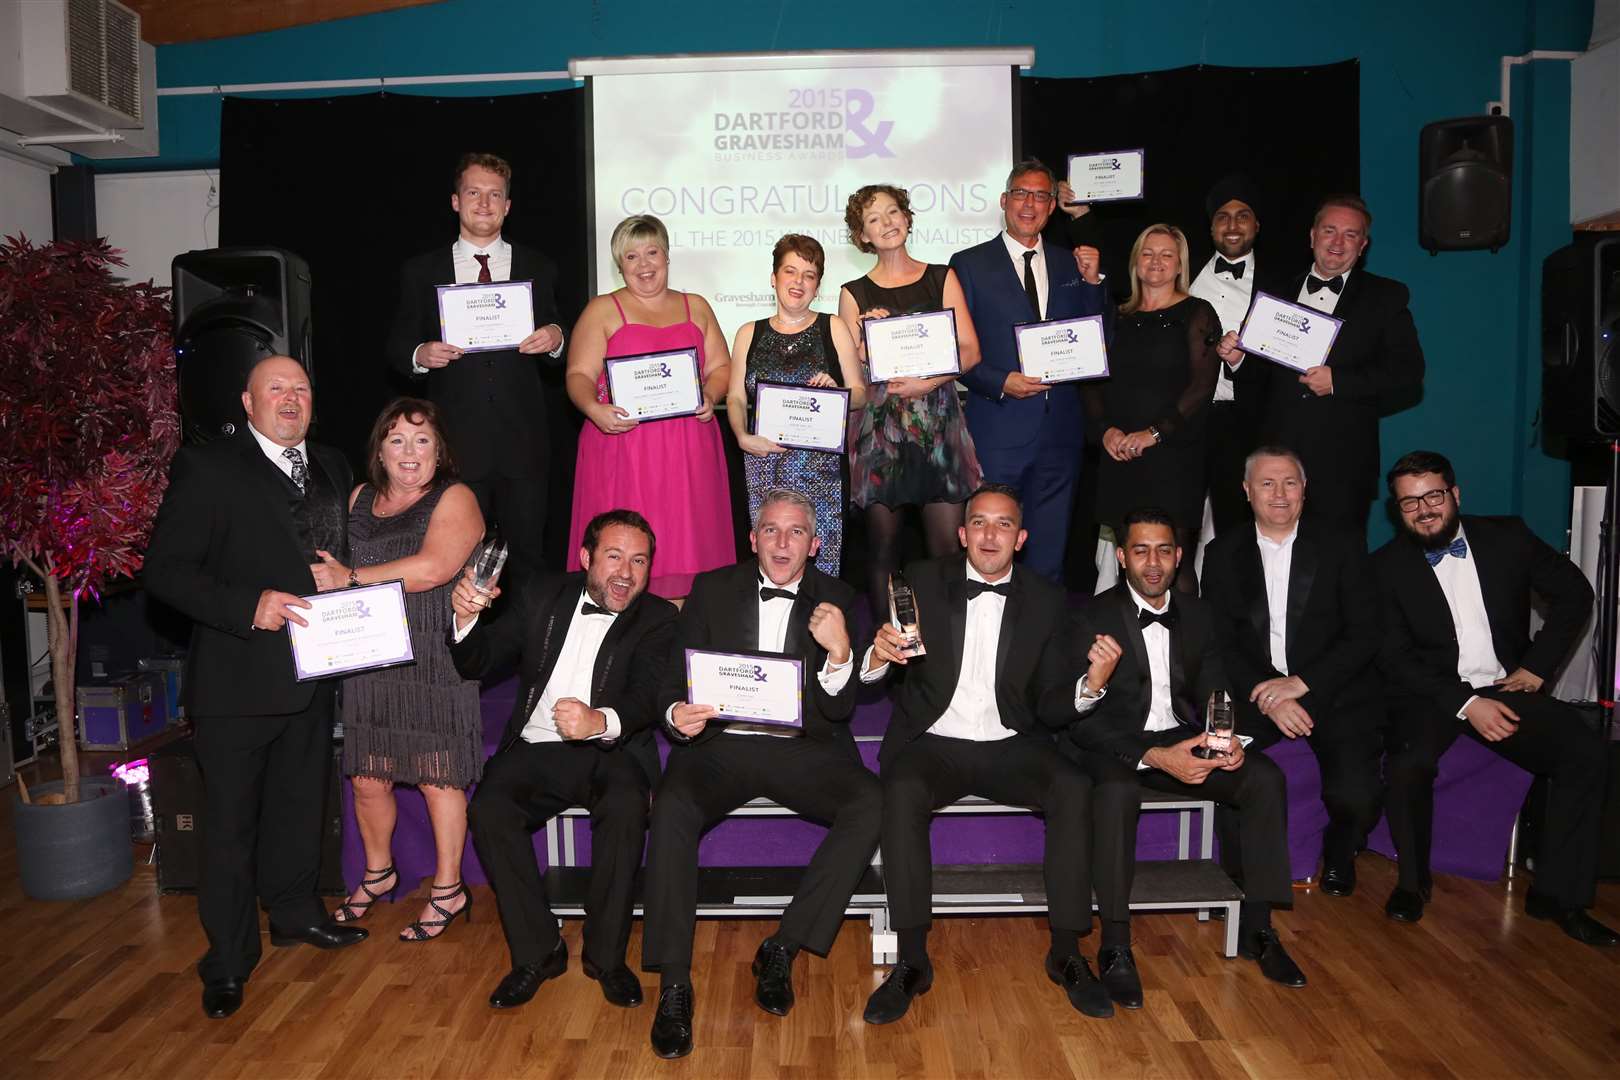 The winners and finalists at the Dartford and Gravesham Business Awards